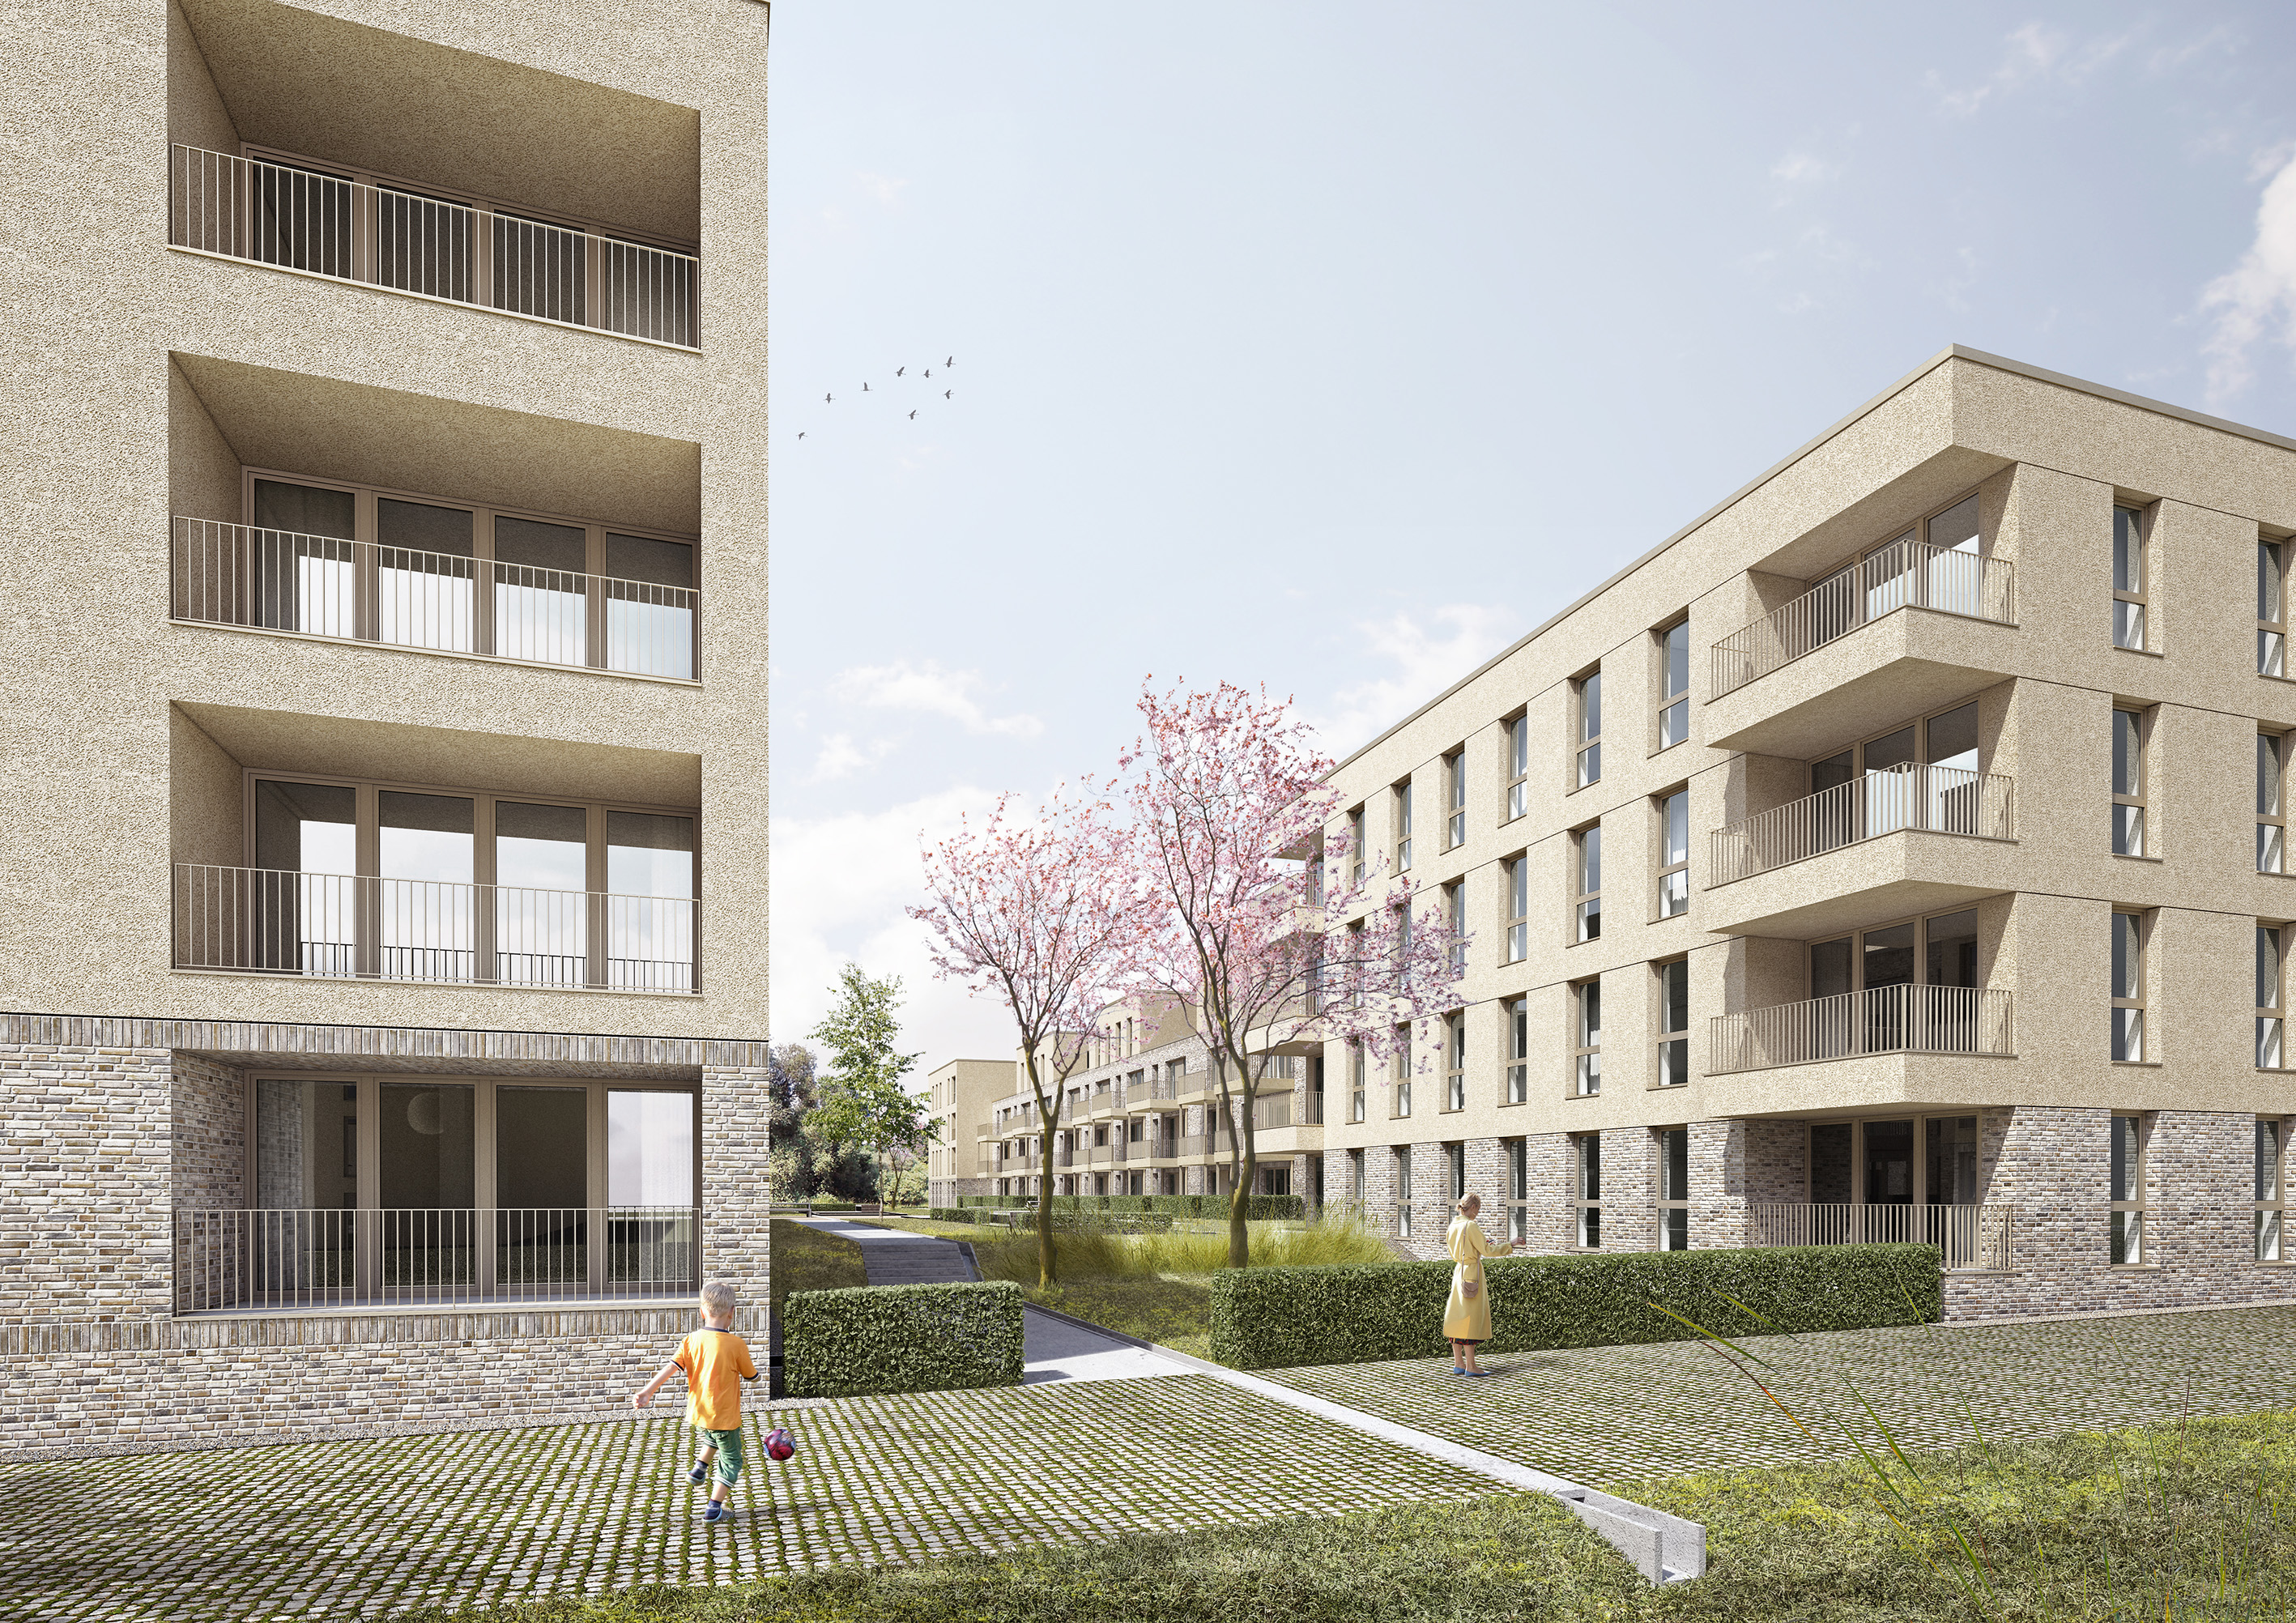 Visualization of the York residential project in Münster